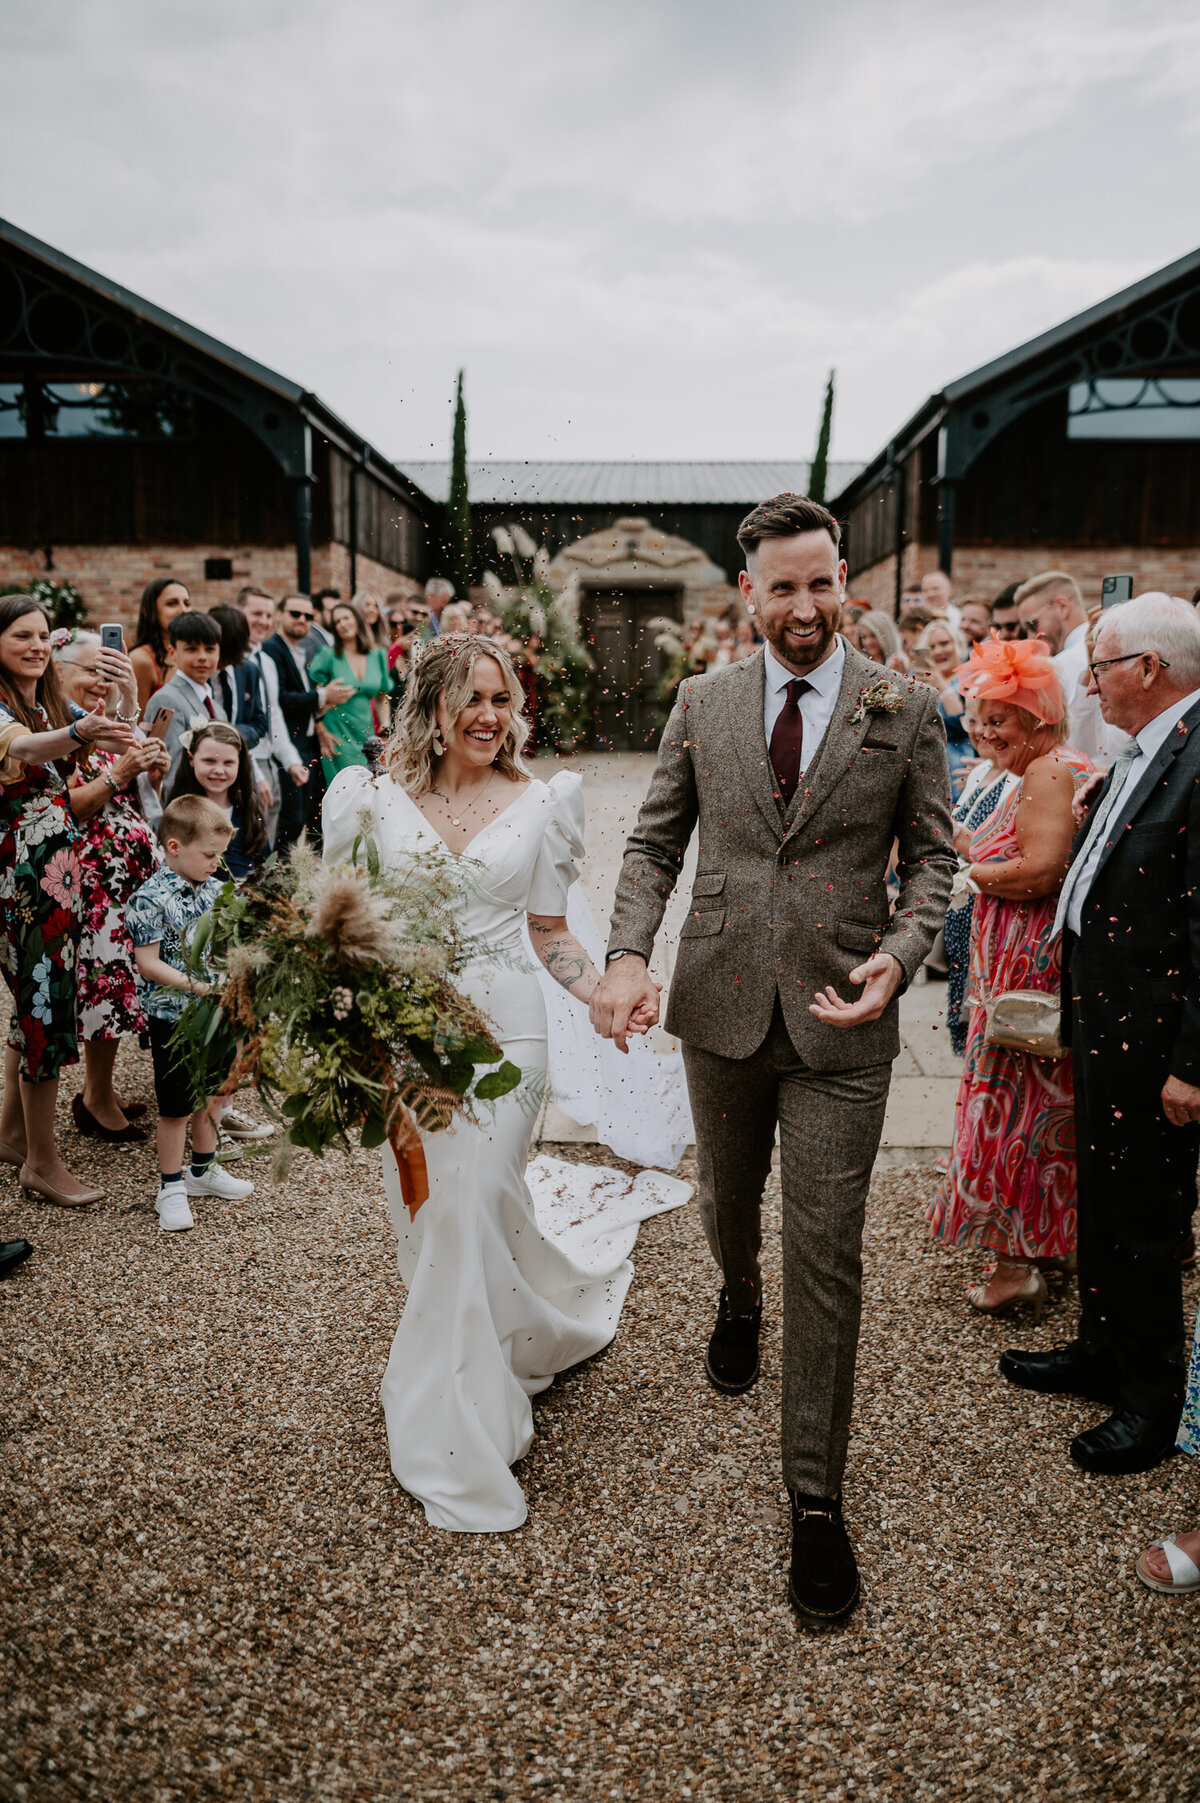 A wedding couple walk through a confetti line at The Willow Marsh Farm. The bride is wearing a puffed shoulder wedding dress and holding a large wild flower boho bouquet.